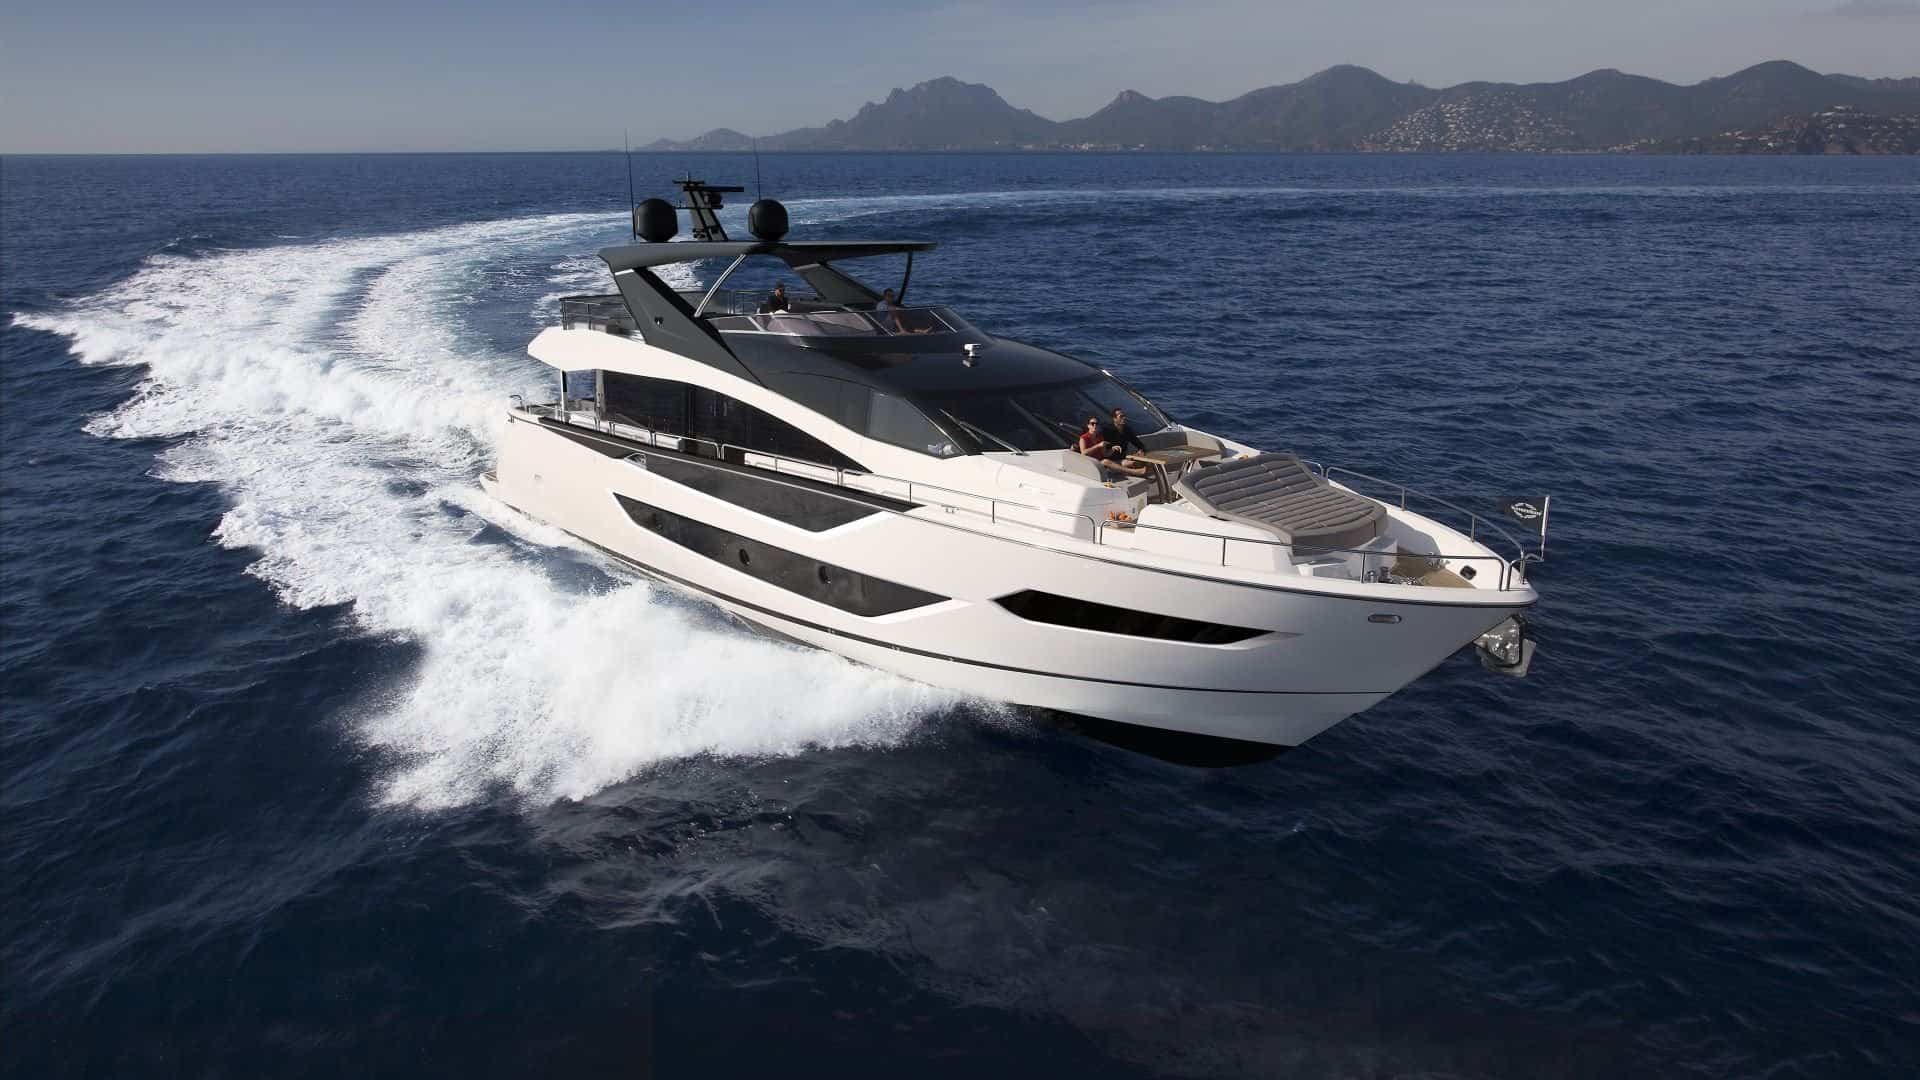 360 VR Virtual Tours of the Sunseeker 88 Yacht